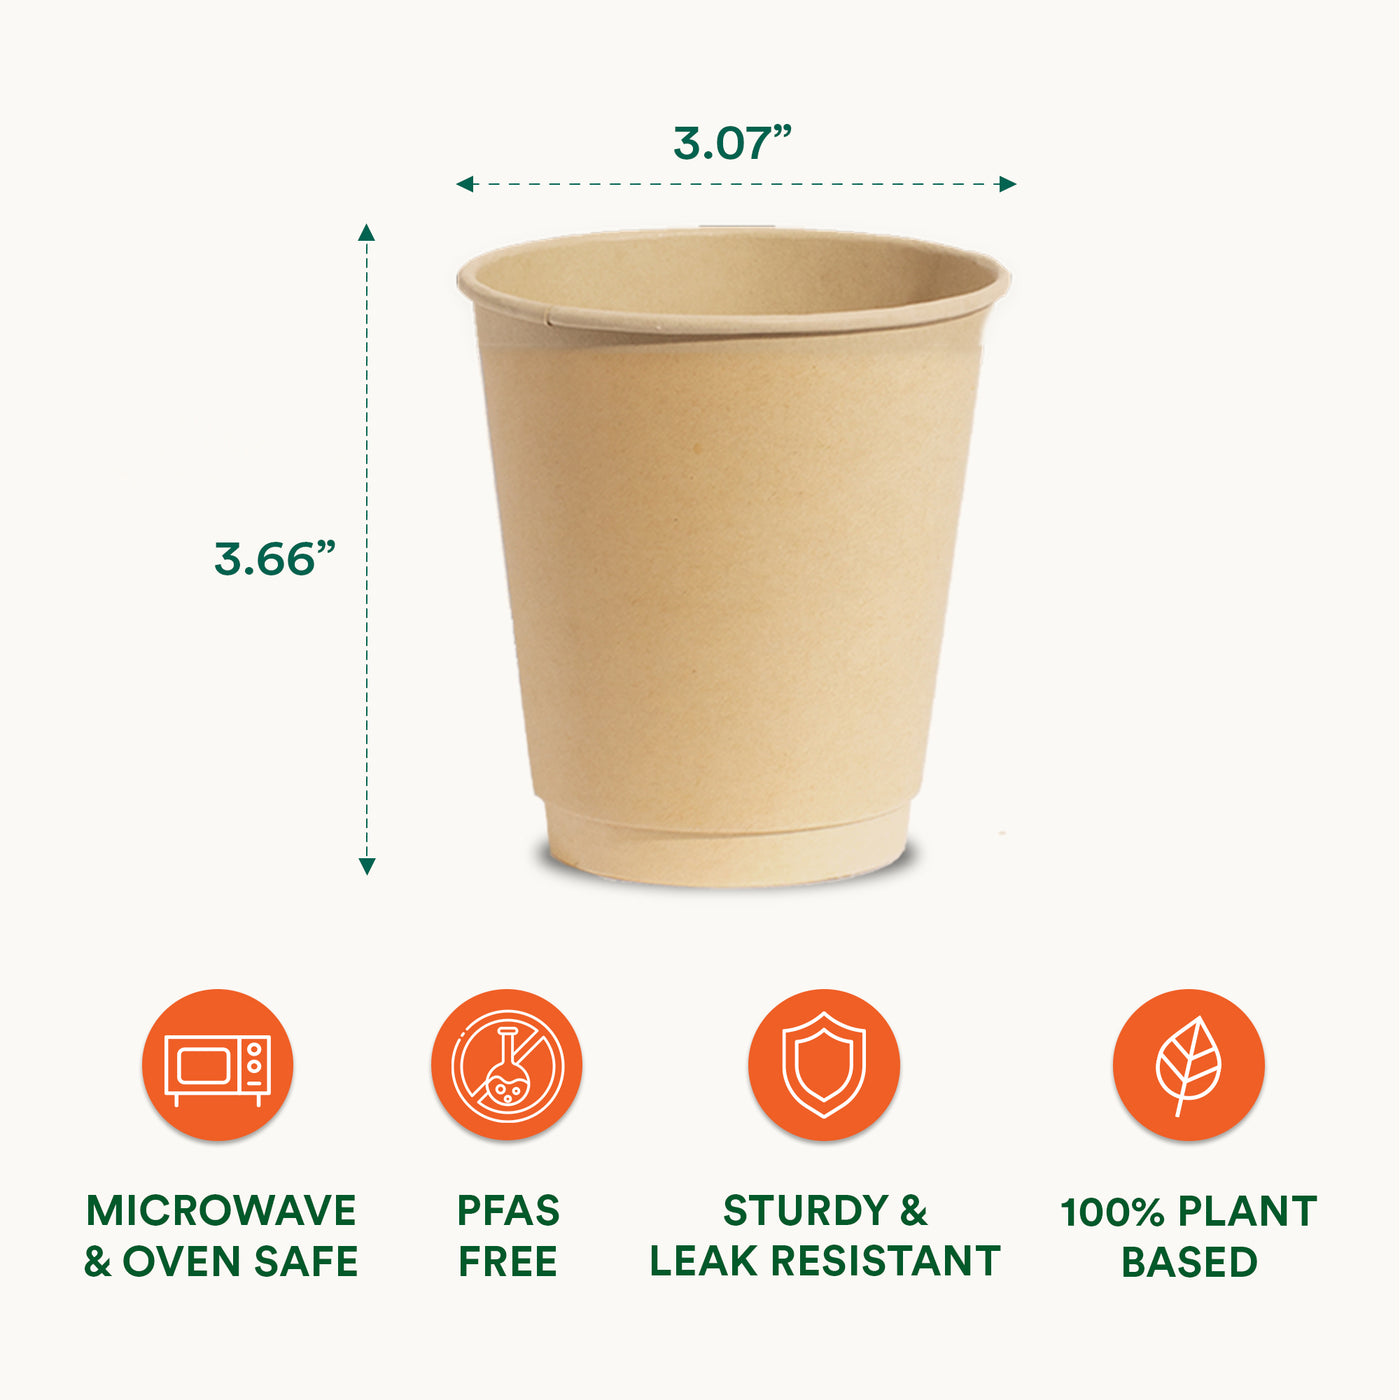 An 8oz Disposable Coffee Cup made from Bagasse, featuring measurements and size indicators on a paper cup.